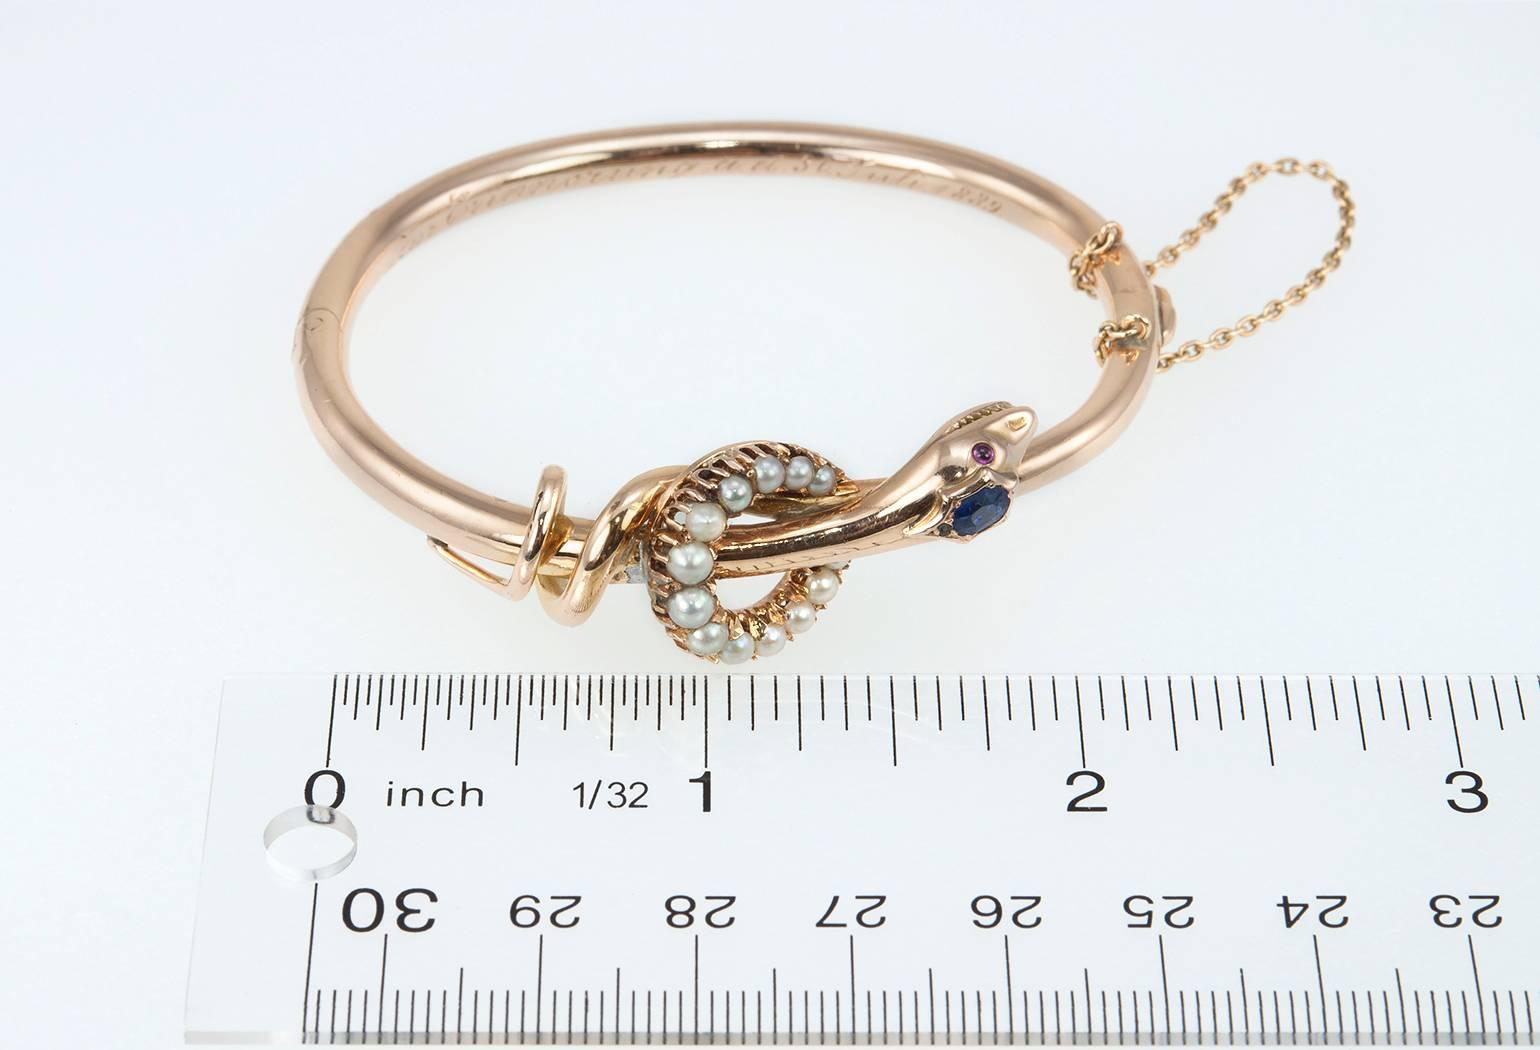 Victorian 14 karat rose gold snake bangle bracelet with a sapphire head and garnet cabochon eyes with 13 pearls set around the head.  The inside of the bracelet is engraved in script that reads 